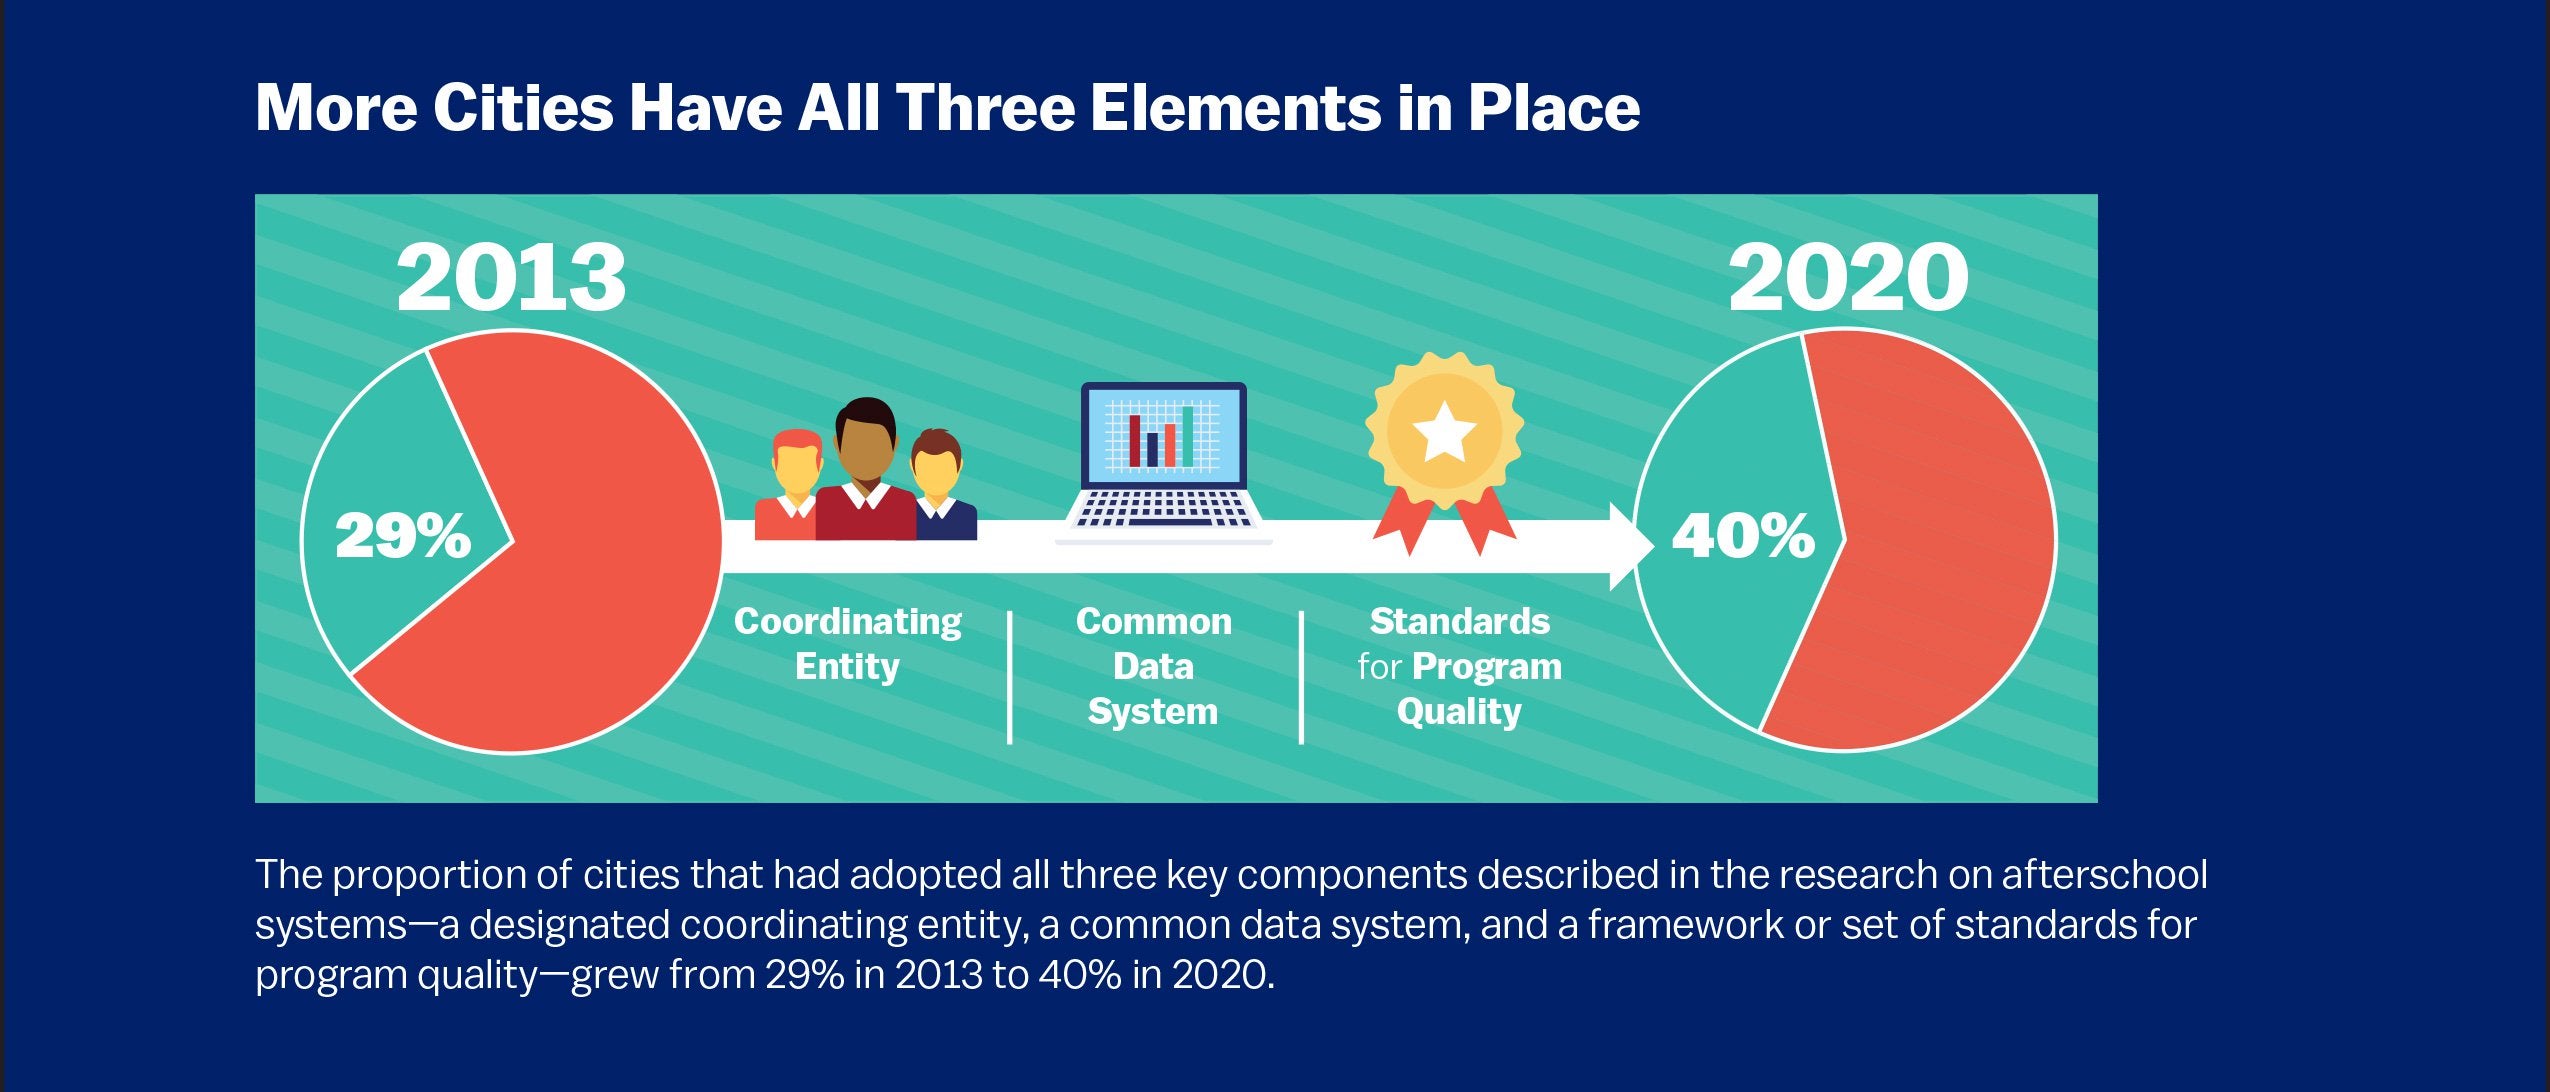 Infographic: More Cities Have All Three Elements in (Coordinating Entity, Common Data System, Standards for Program Quality)